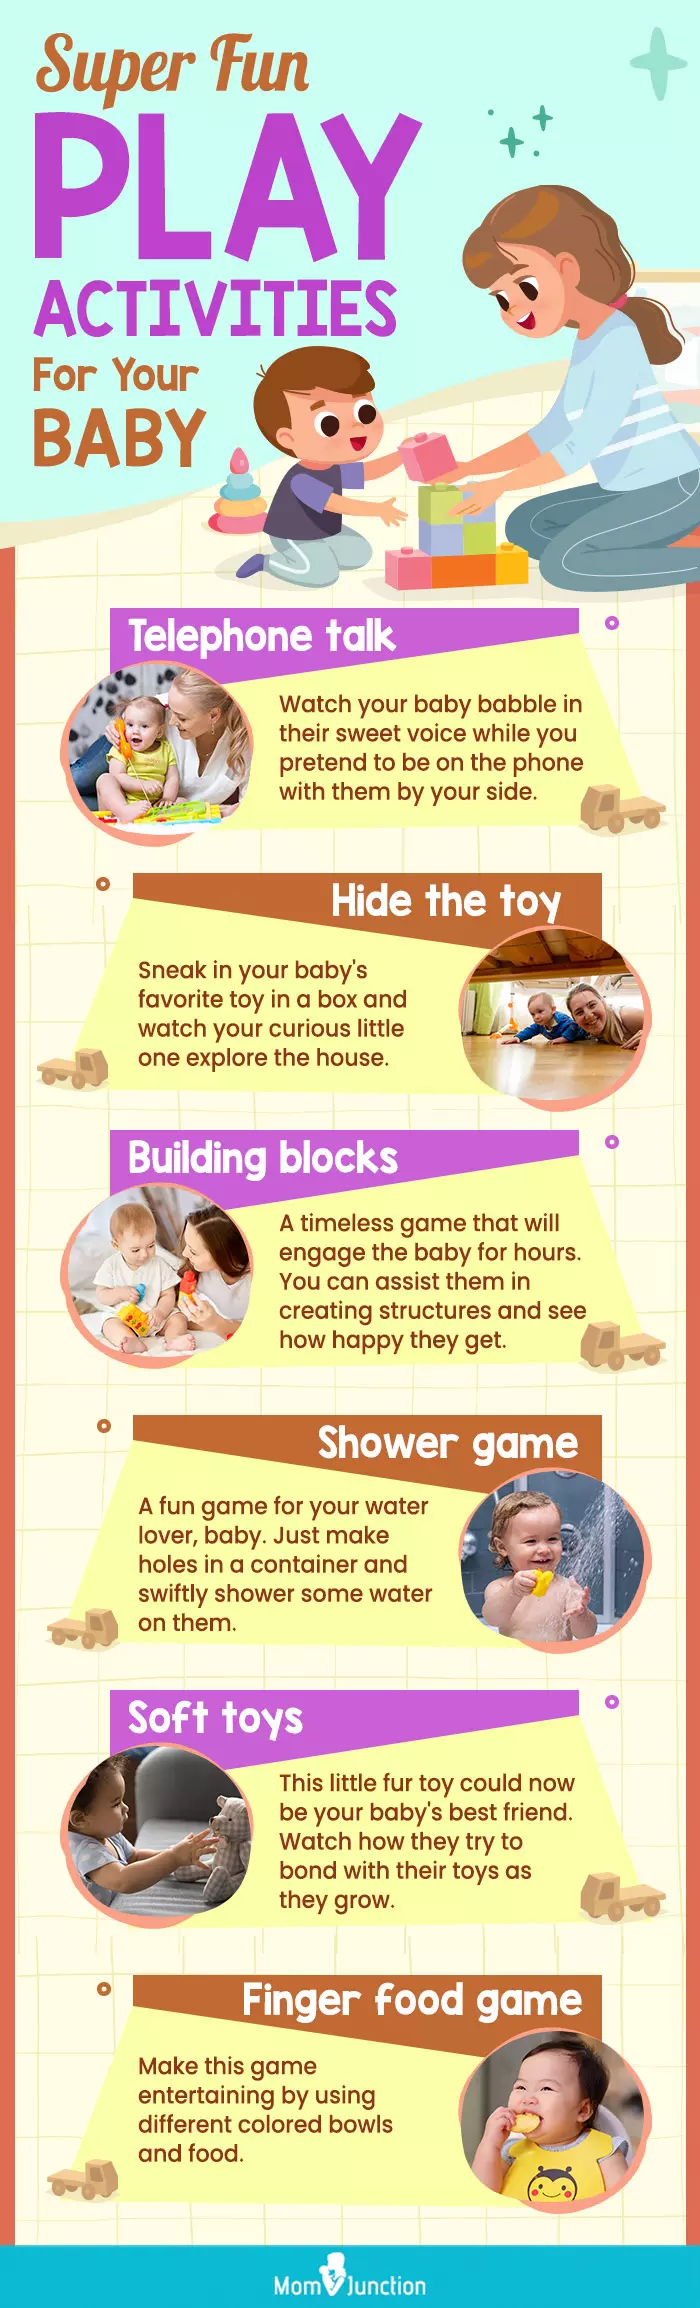 super fun play activities for your baby (infographic) 